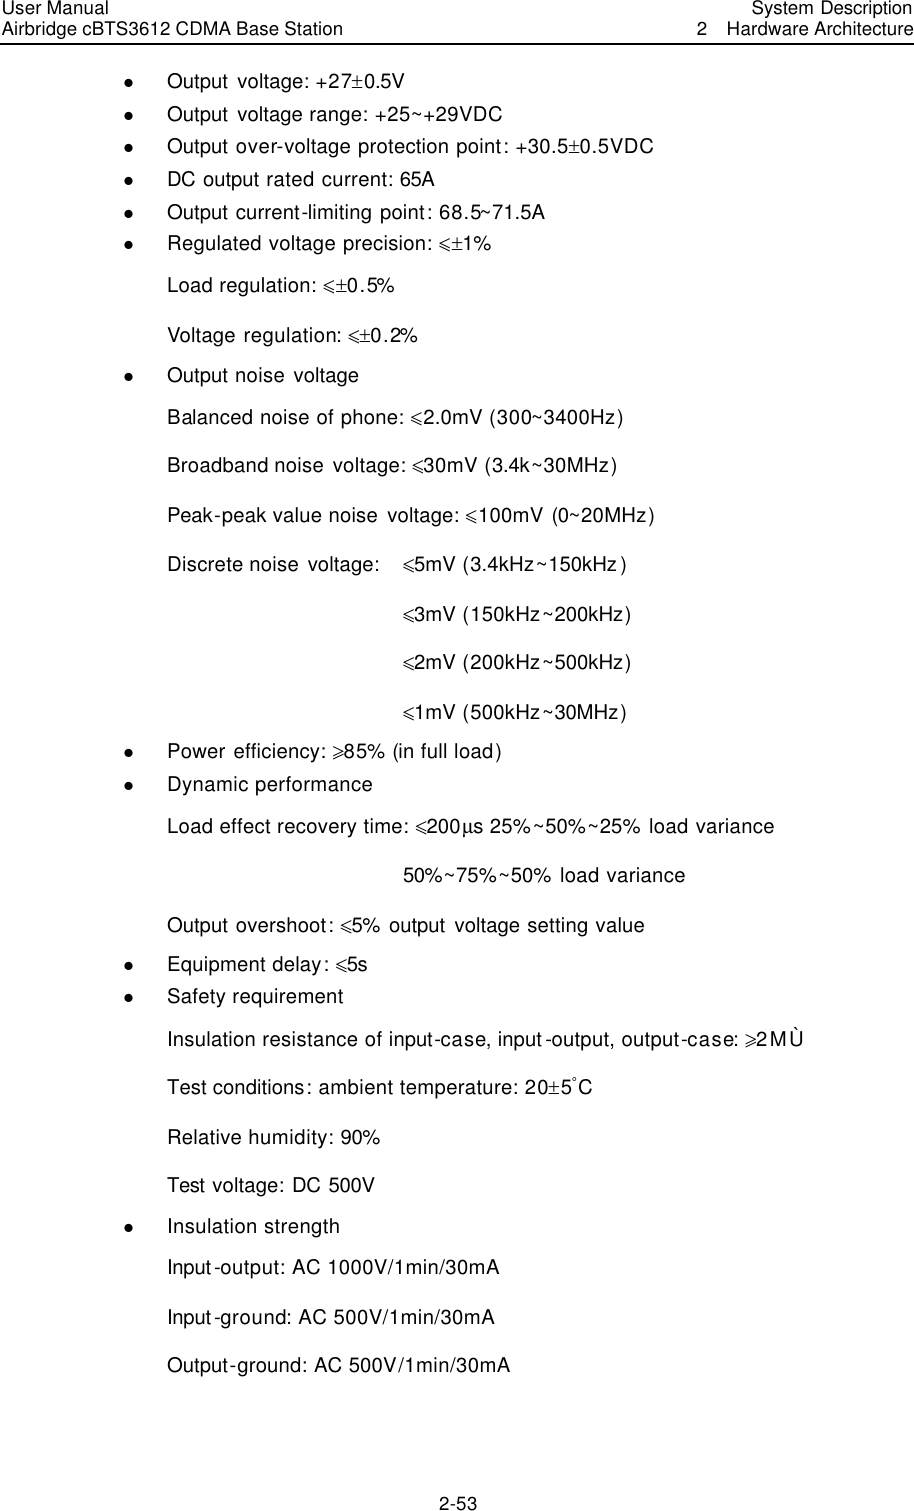 User Manual Airbridge cBTS3612 CDMA Base Station   System Description2  Hardware Architecture 2-53 l Output voltage: +27!0.5V l Output voltage range: +25~+29VDC l Output over-voltage protection point: +30.5!0.5VDC l DC output rated current: 65A l Output current-limiting point: 68.5~71.5A l Regulated voltage precision: Ÿ!1% Load regulation: Ÿ!0.5% Voltage regulation: Ÿ!0.2% l Output noise voltage Balanced noise of phone: Ÿ2.0mV (300~3400Hz) Broadband noise voltage: Ÿ30mV (3.4k~30MHz) Peak-peak value noise voltage: Ÿ100mV (0~20MHz) Discrete noise voltage:   Ÿ5mV (3.4kHz~150kHz)             Ÿ3mV (150kHz~200kHz)             Ÿ2mV (200kHz~500kHz)             Ÿ1mV (500kHz~30MHz) l Power efficiency: ¦85% (in full load) l Dynamic performance Load effect recovery time: Ÿ200µs 25%~50%~25% load variance             50%~75%~50% load variance Output overshoot: Ÿ5% output voltage setting value l Equipment delay: Ÿ5s l Safety requirement Insulation resistance of input-case, input -output, output-case: ¦2MÙ Test conditions: ambient temperature: 20!5âC Relative humidity: 90% Test voltage: DC 500V l Insulation strength Input-output: AC 1000V/1min/30mA Input-ground: AC 500V/1min/30mA Output-ground: AC 500V/1min/30mA  